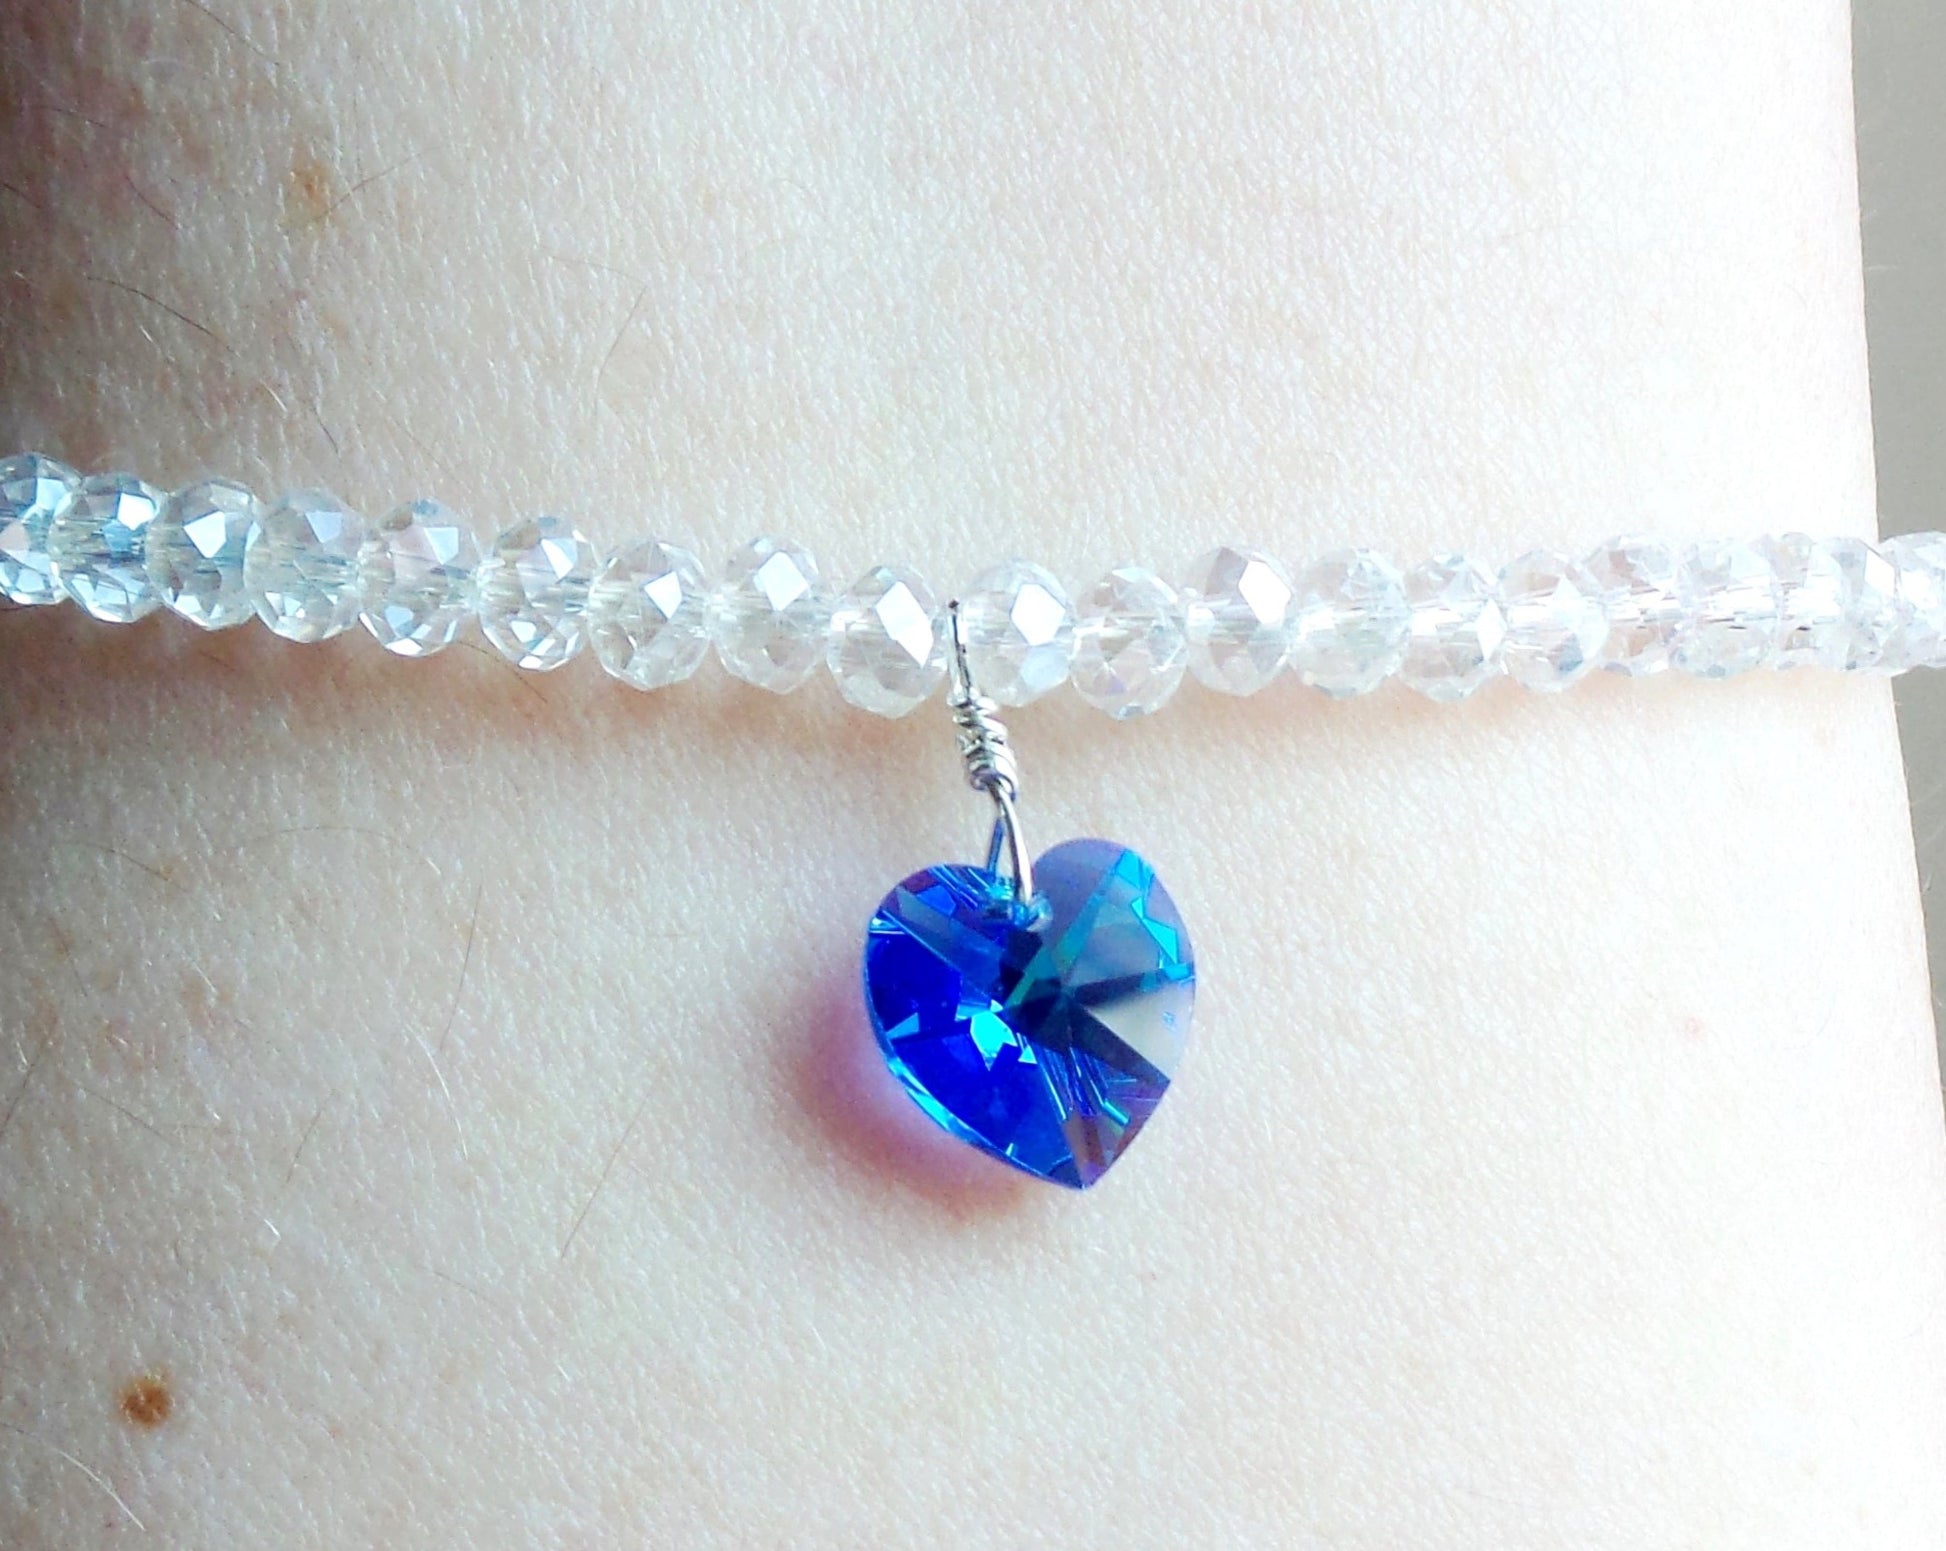 Something Blue Crystal Heart Beaded Ankle Bracelet, a Blue Crystal Heart dangling from clear Ab crystal beads, finished with Sterling Silver 